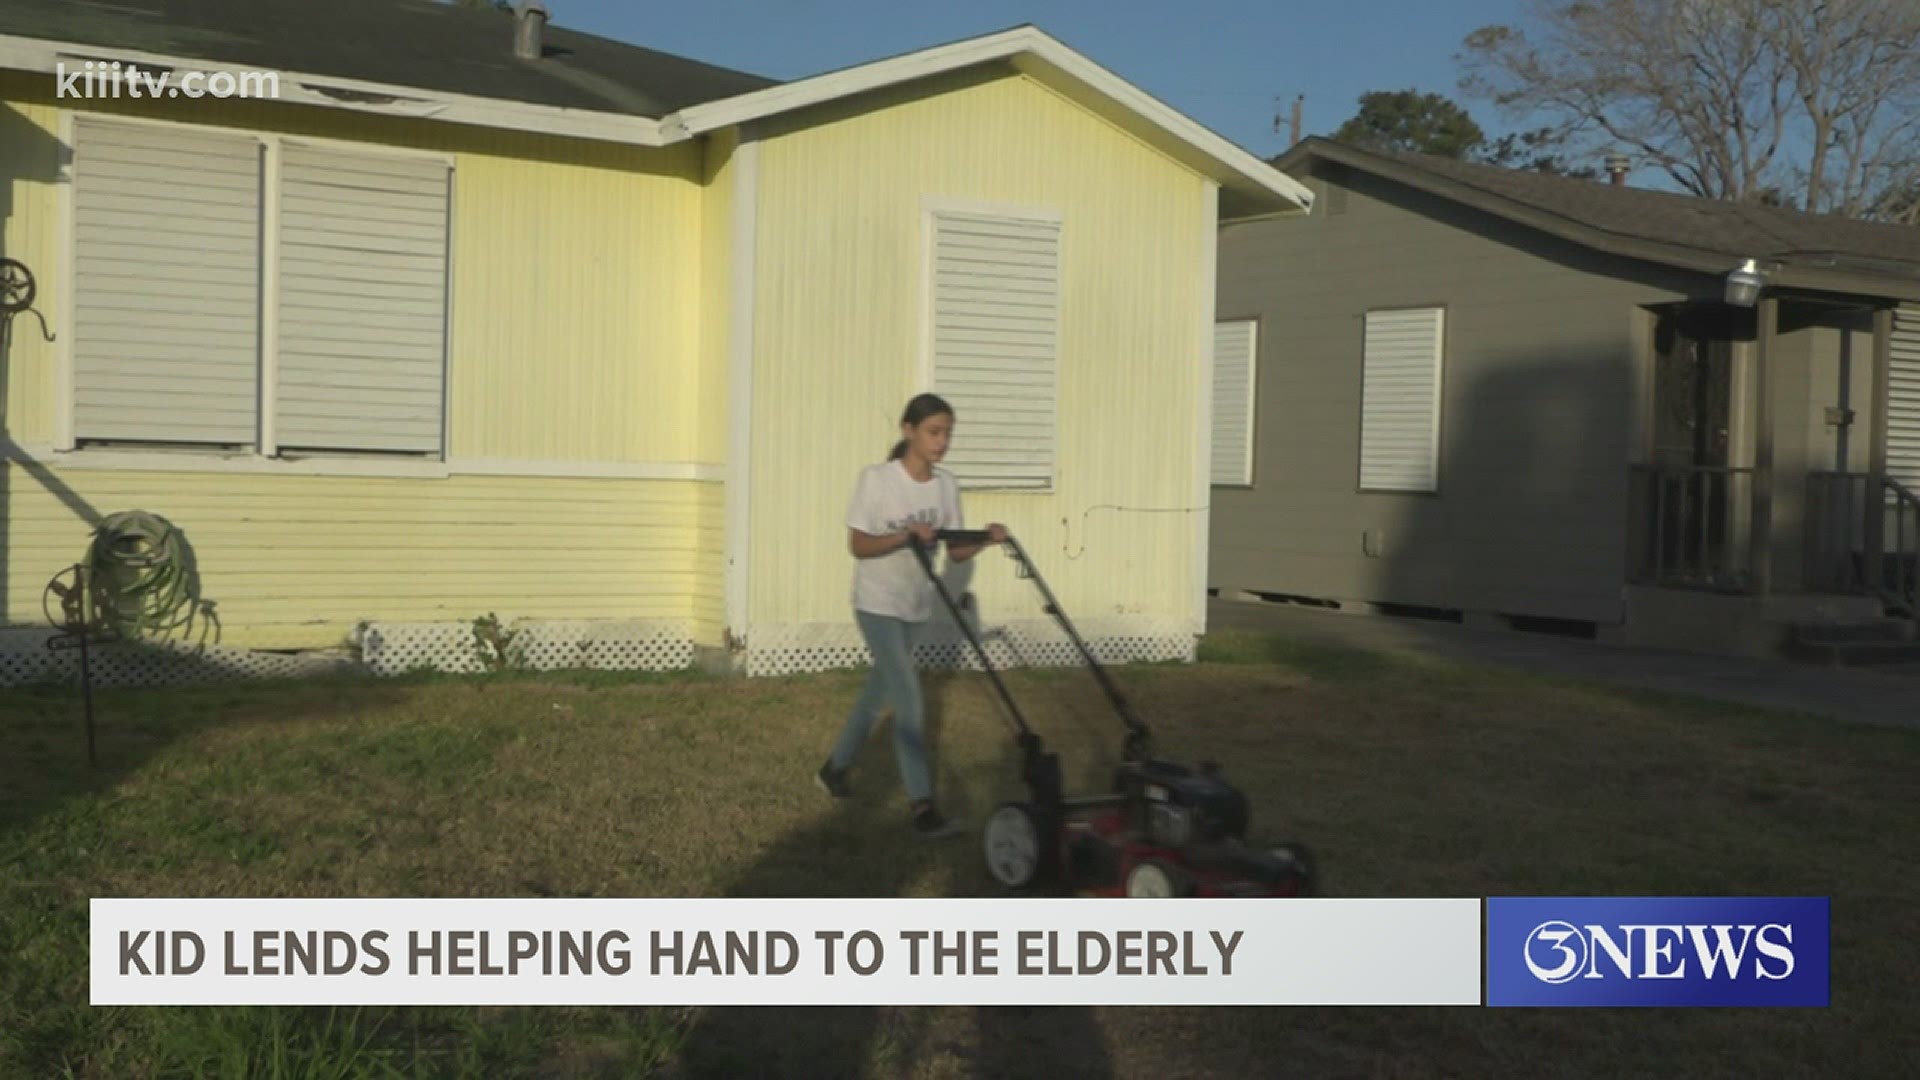 After putting a call out on social media, a young girl in the Corpus Christi area is spending her time cutting yards for free.